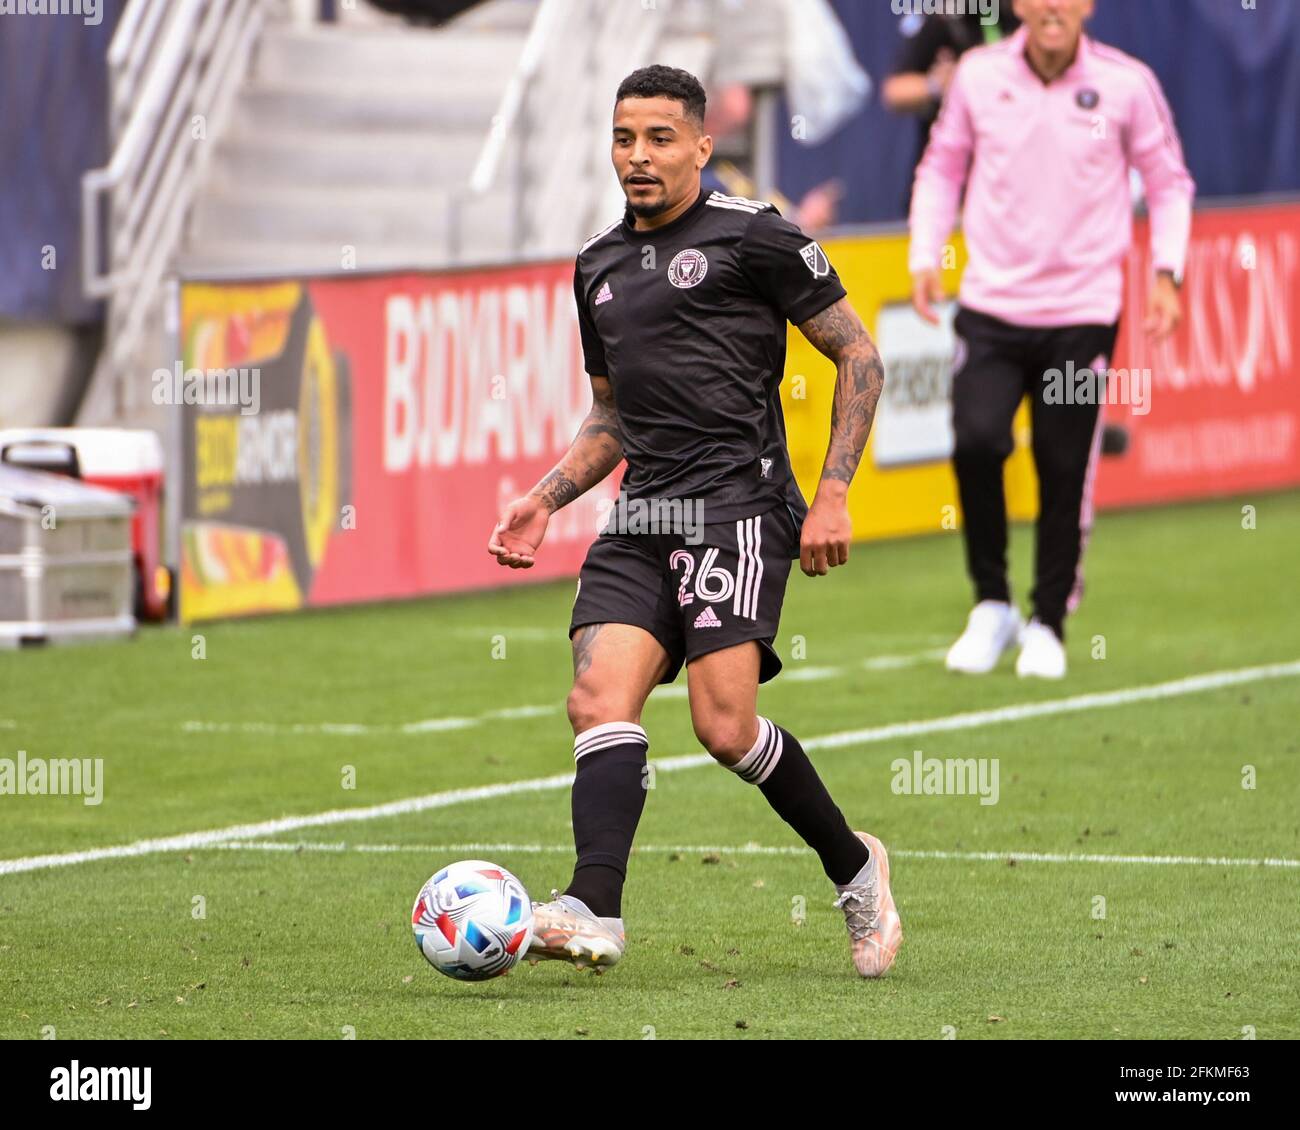 Nashville, TN, USA. 02nd May, 2021. Inter Miami midfielder, Gregore (26), in action during the MLS match between Inter Miami and Nashville SC at Nissan Stadium in Nashville, TN. Kevin Langley/CSM/Alamy Live News Stock Photo